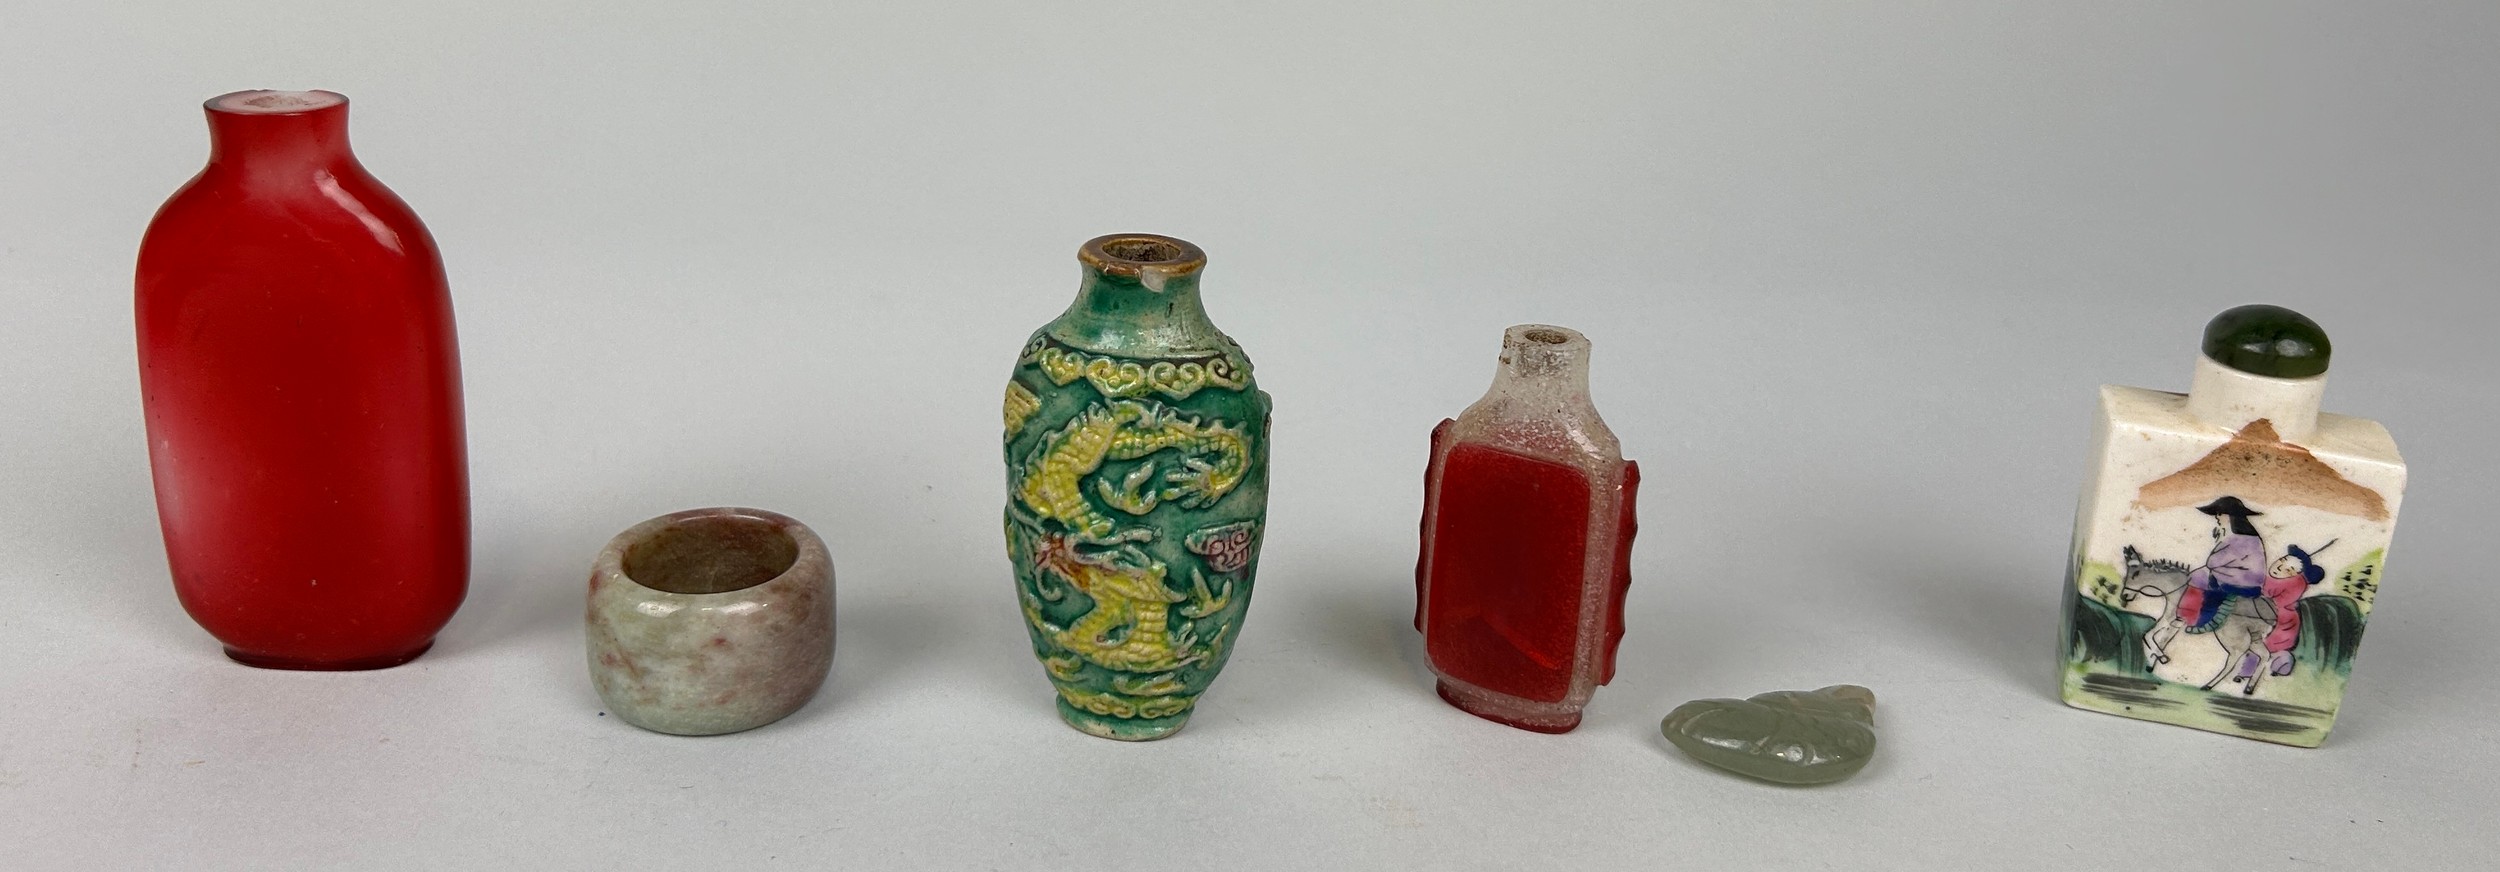 A COLLECTION OF CHINESE SNUFF BOTTLES AND JADE (6)